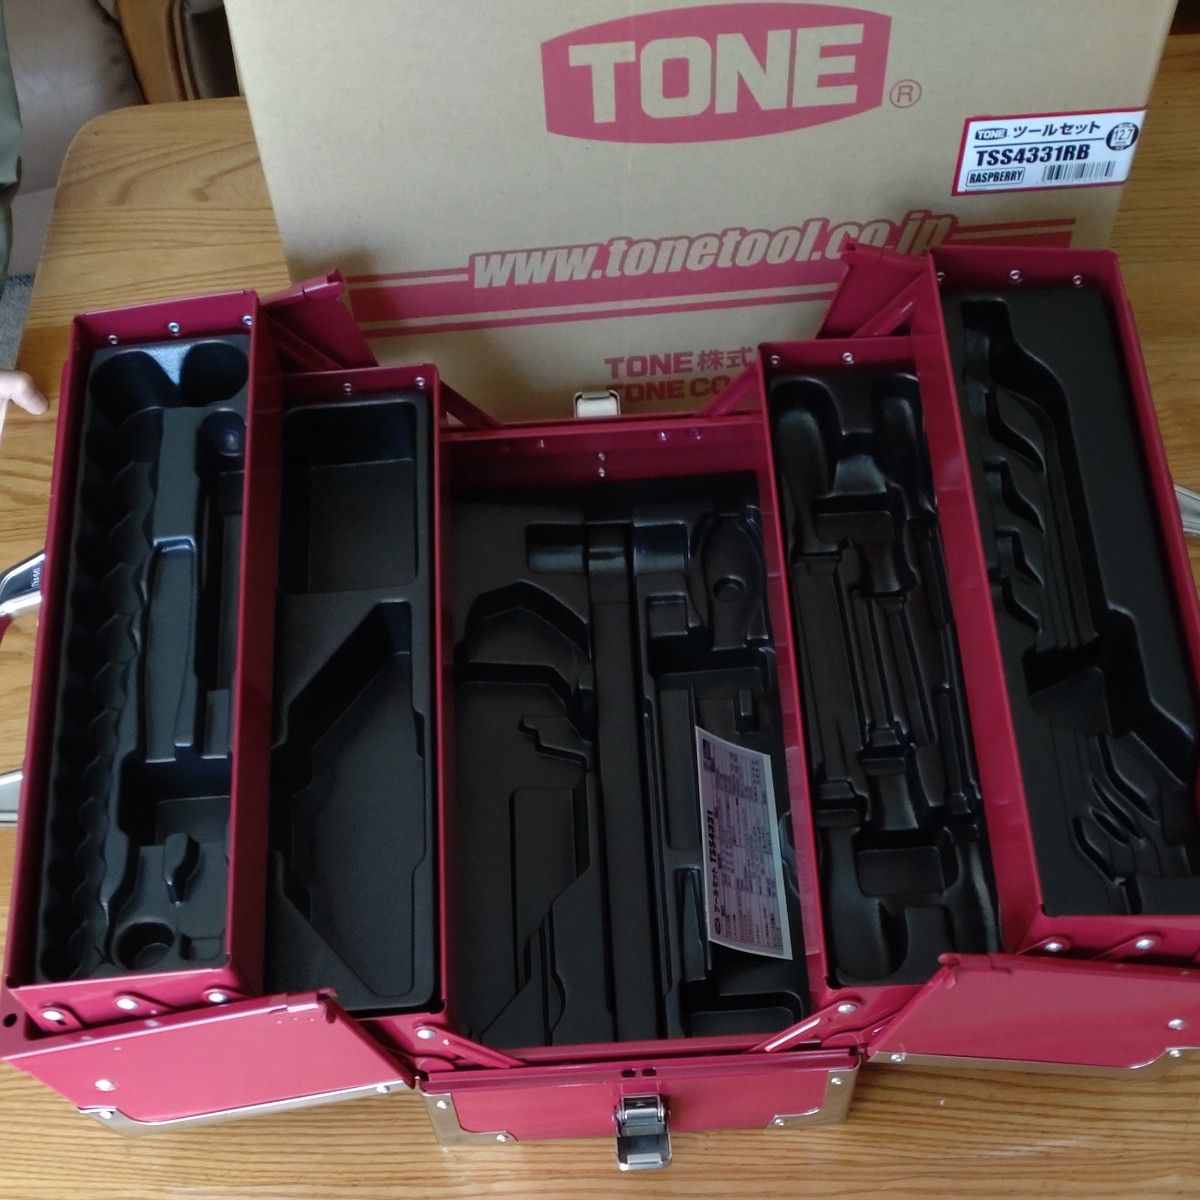 【2024】 TONE (トネ) ツールセット （ラズベリー) TSS4331RB 工具セット